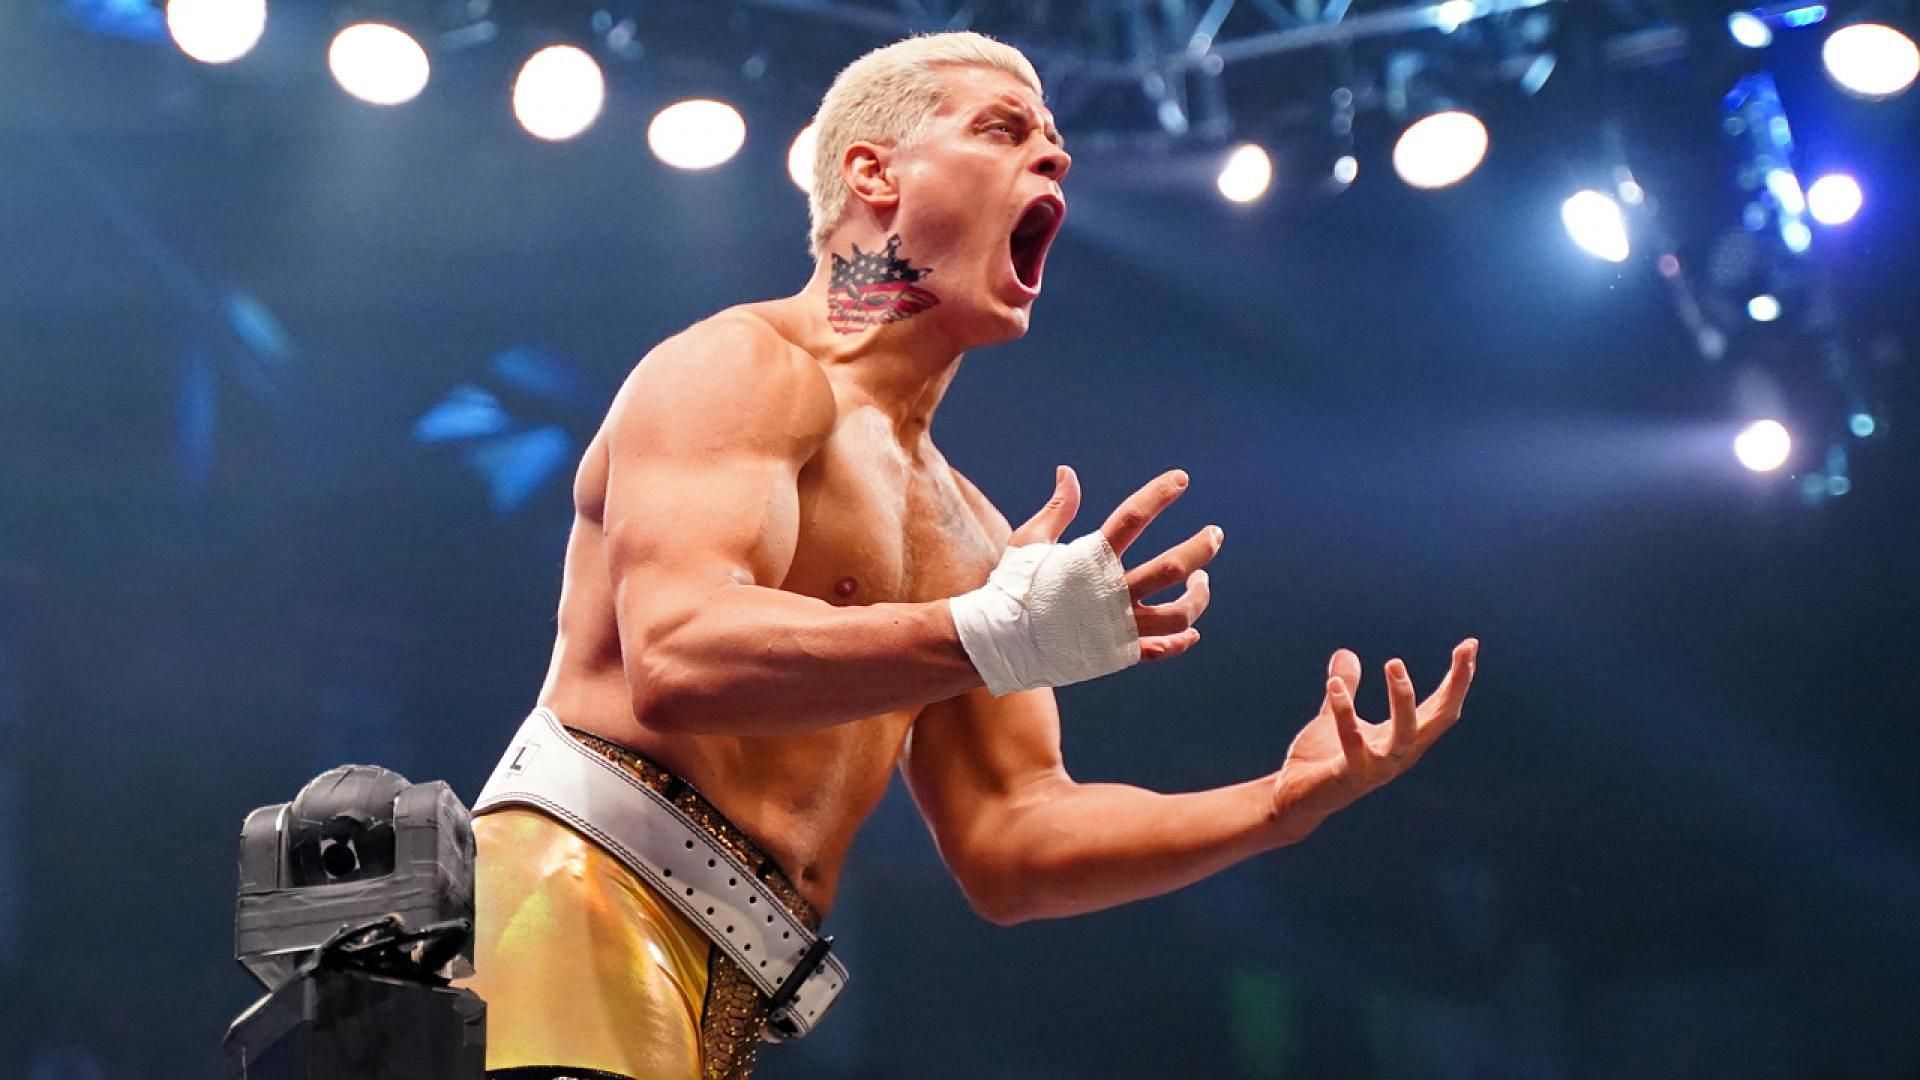 Cody Rhodes may be intent on retiring